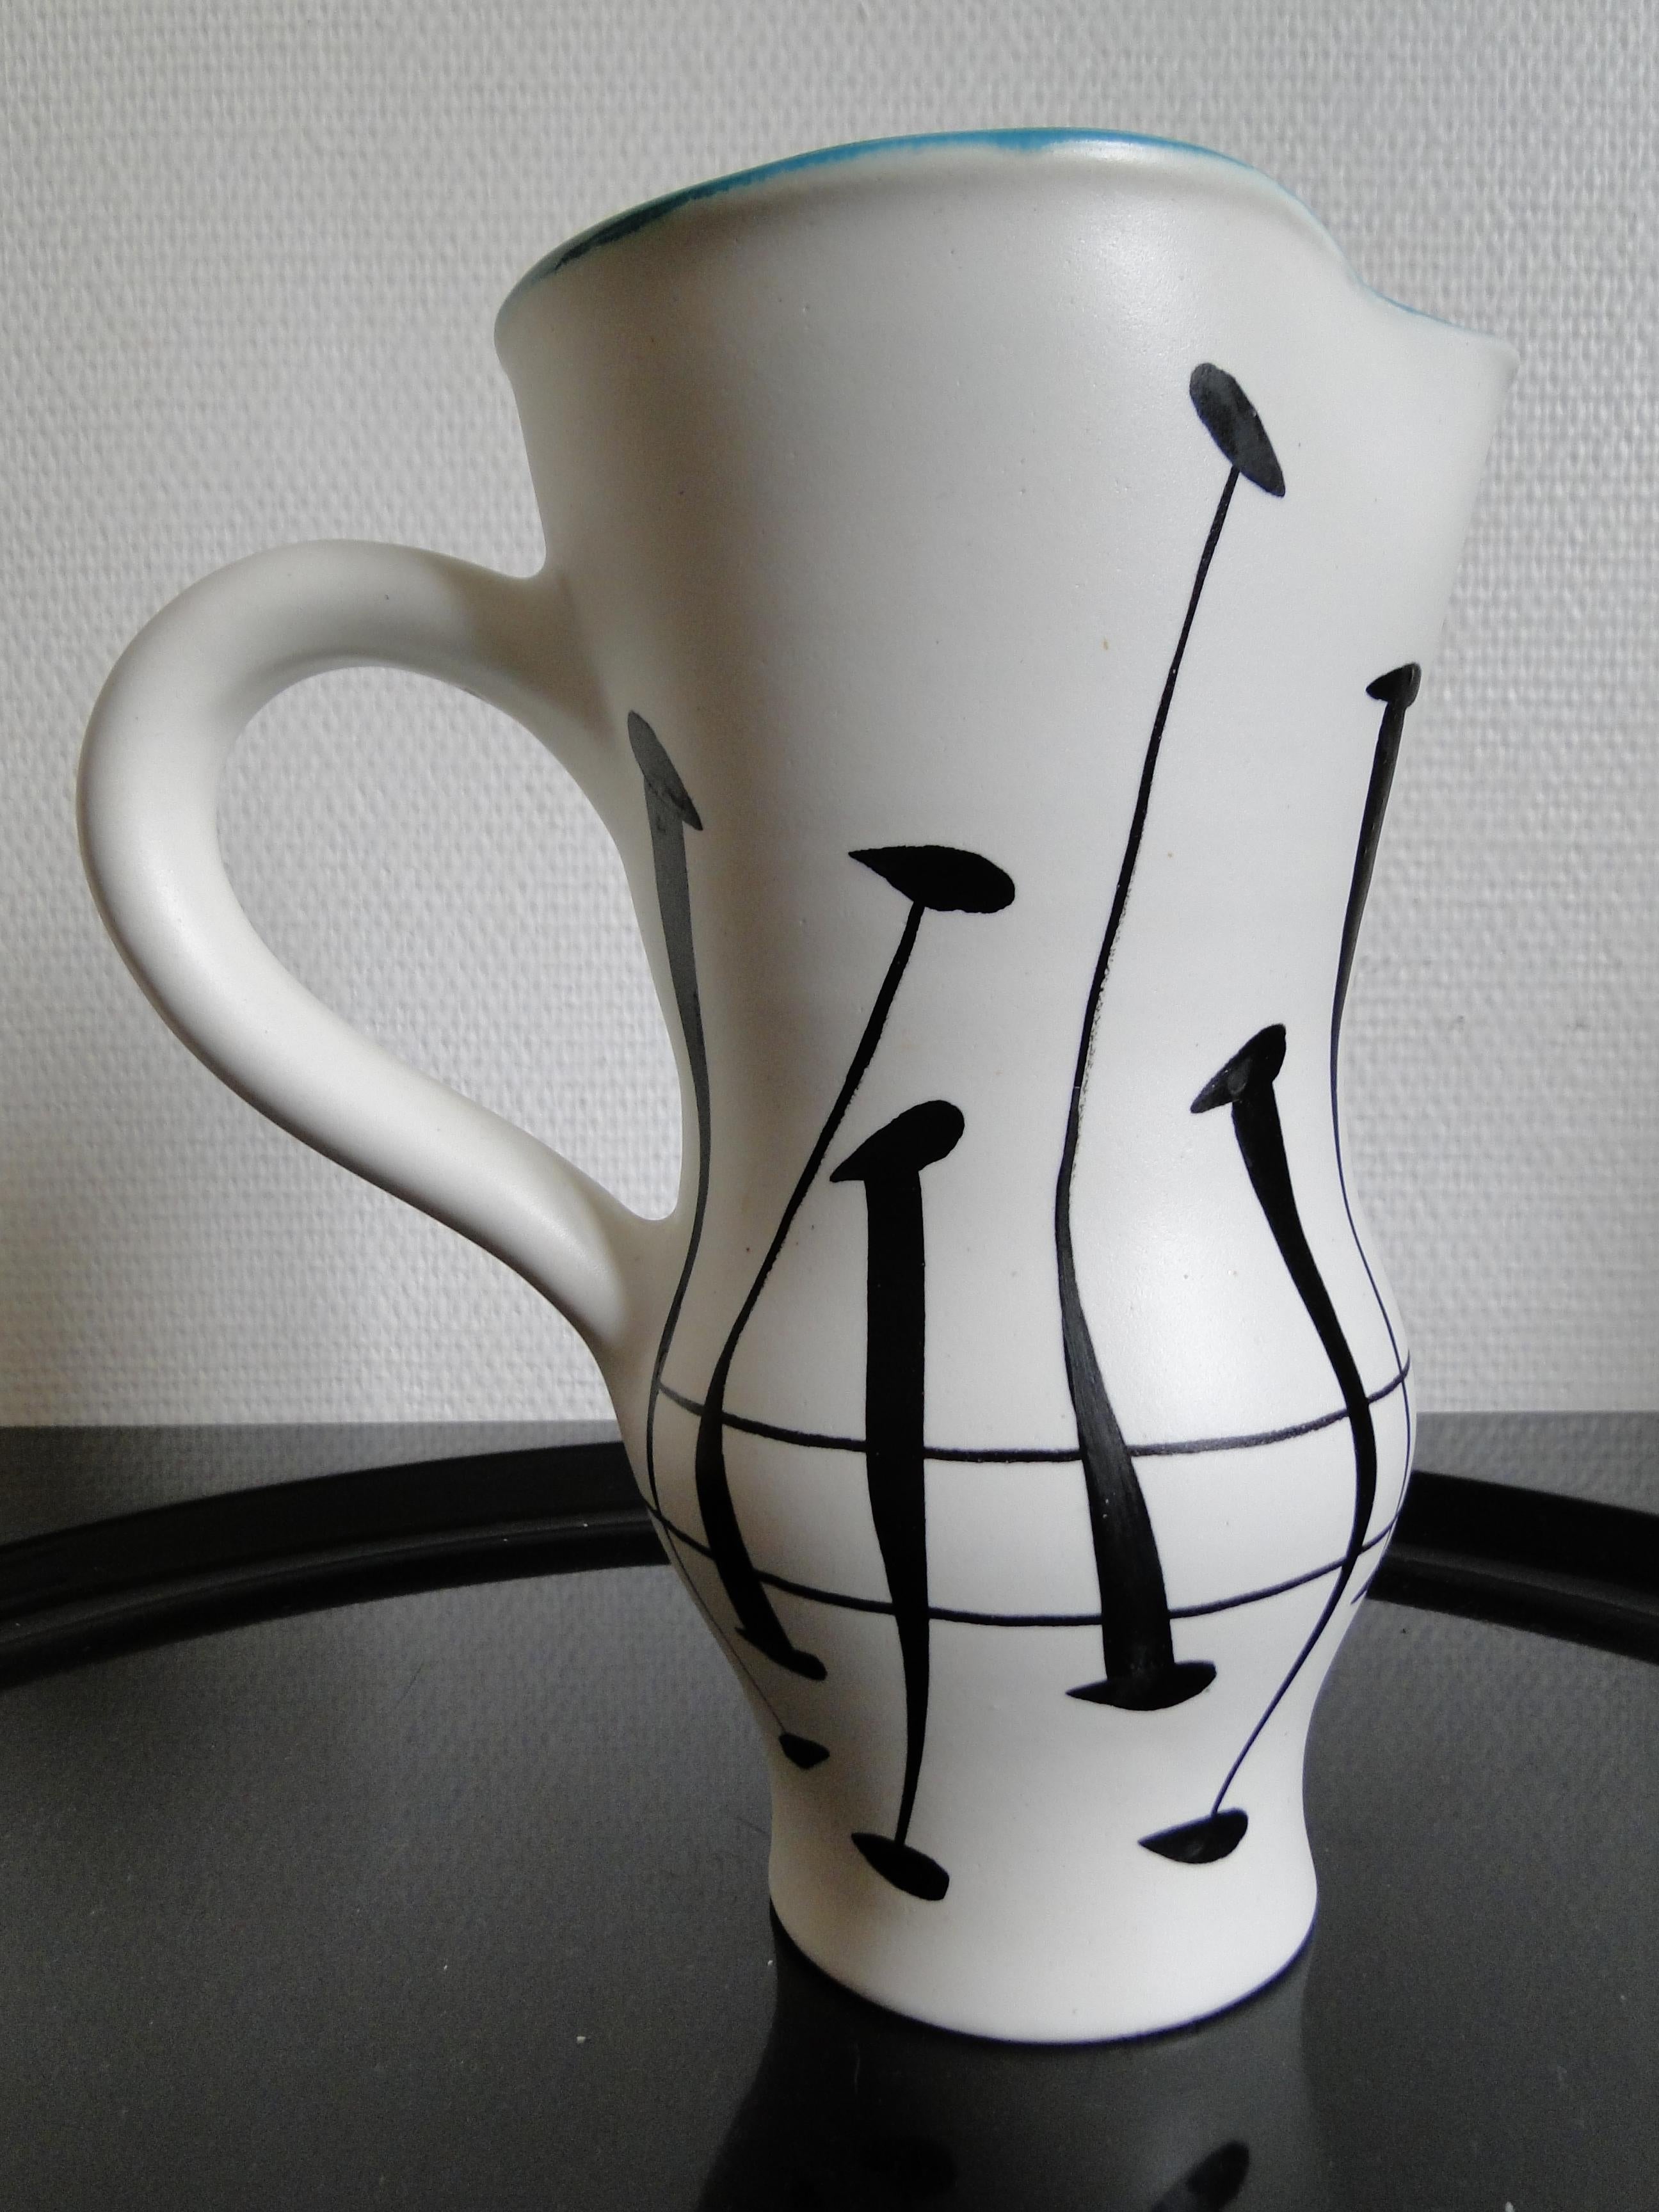 20th Century Roger Capron Ceramic Pitcher Vase by Vallauris  France  For Sale